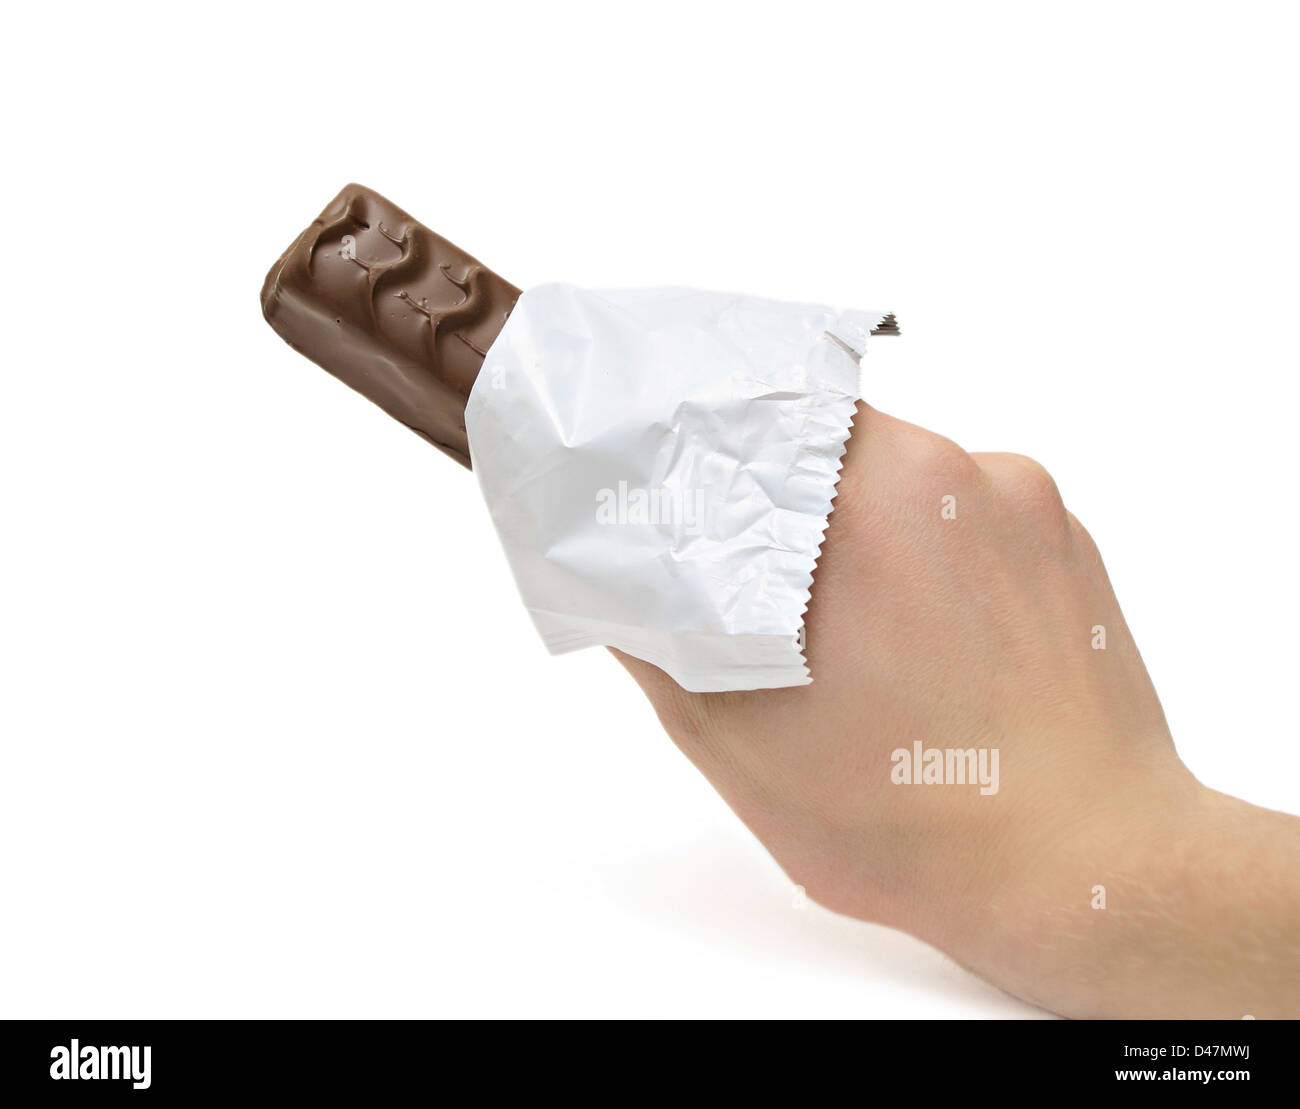 Chocolate bar in the hand isolated Stock Photo